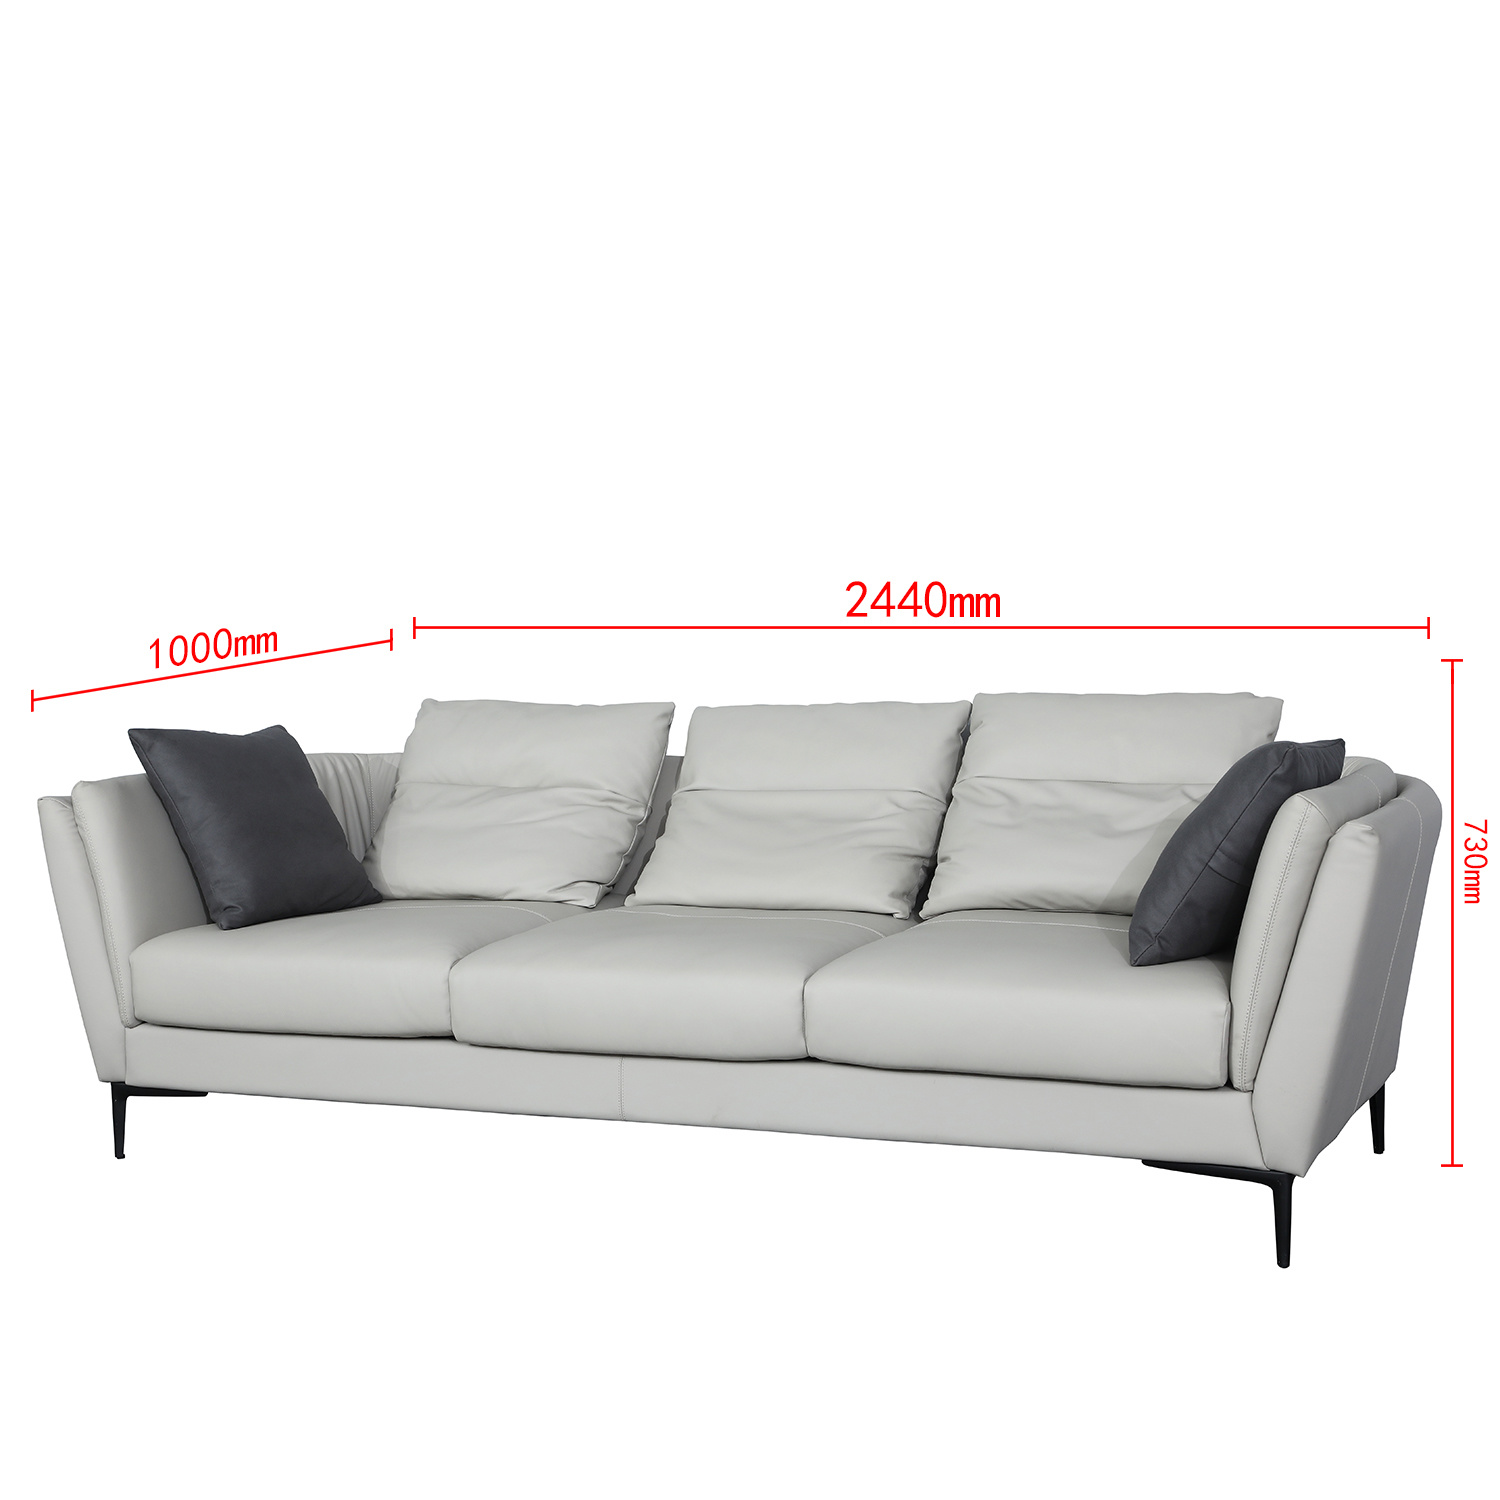 Modern Hotel Home Living Room Sectional Leather Sofa